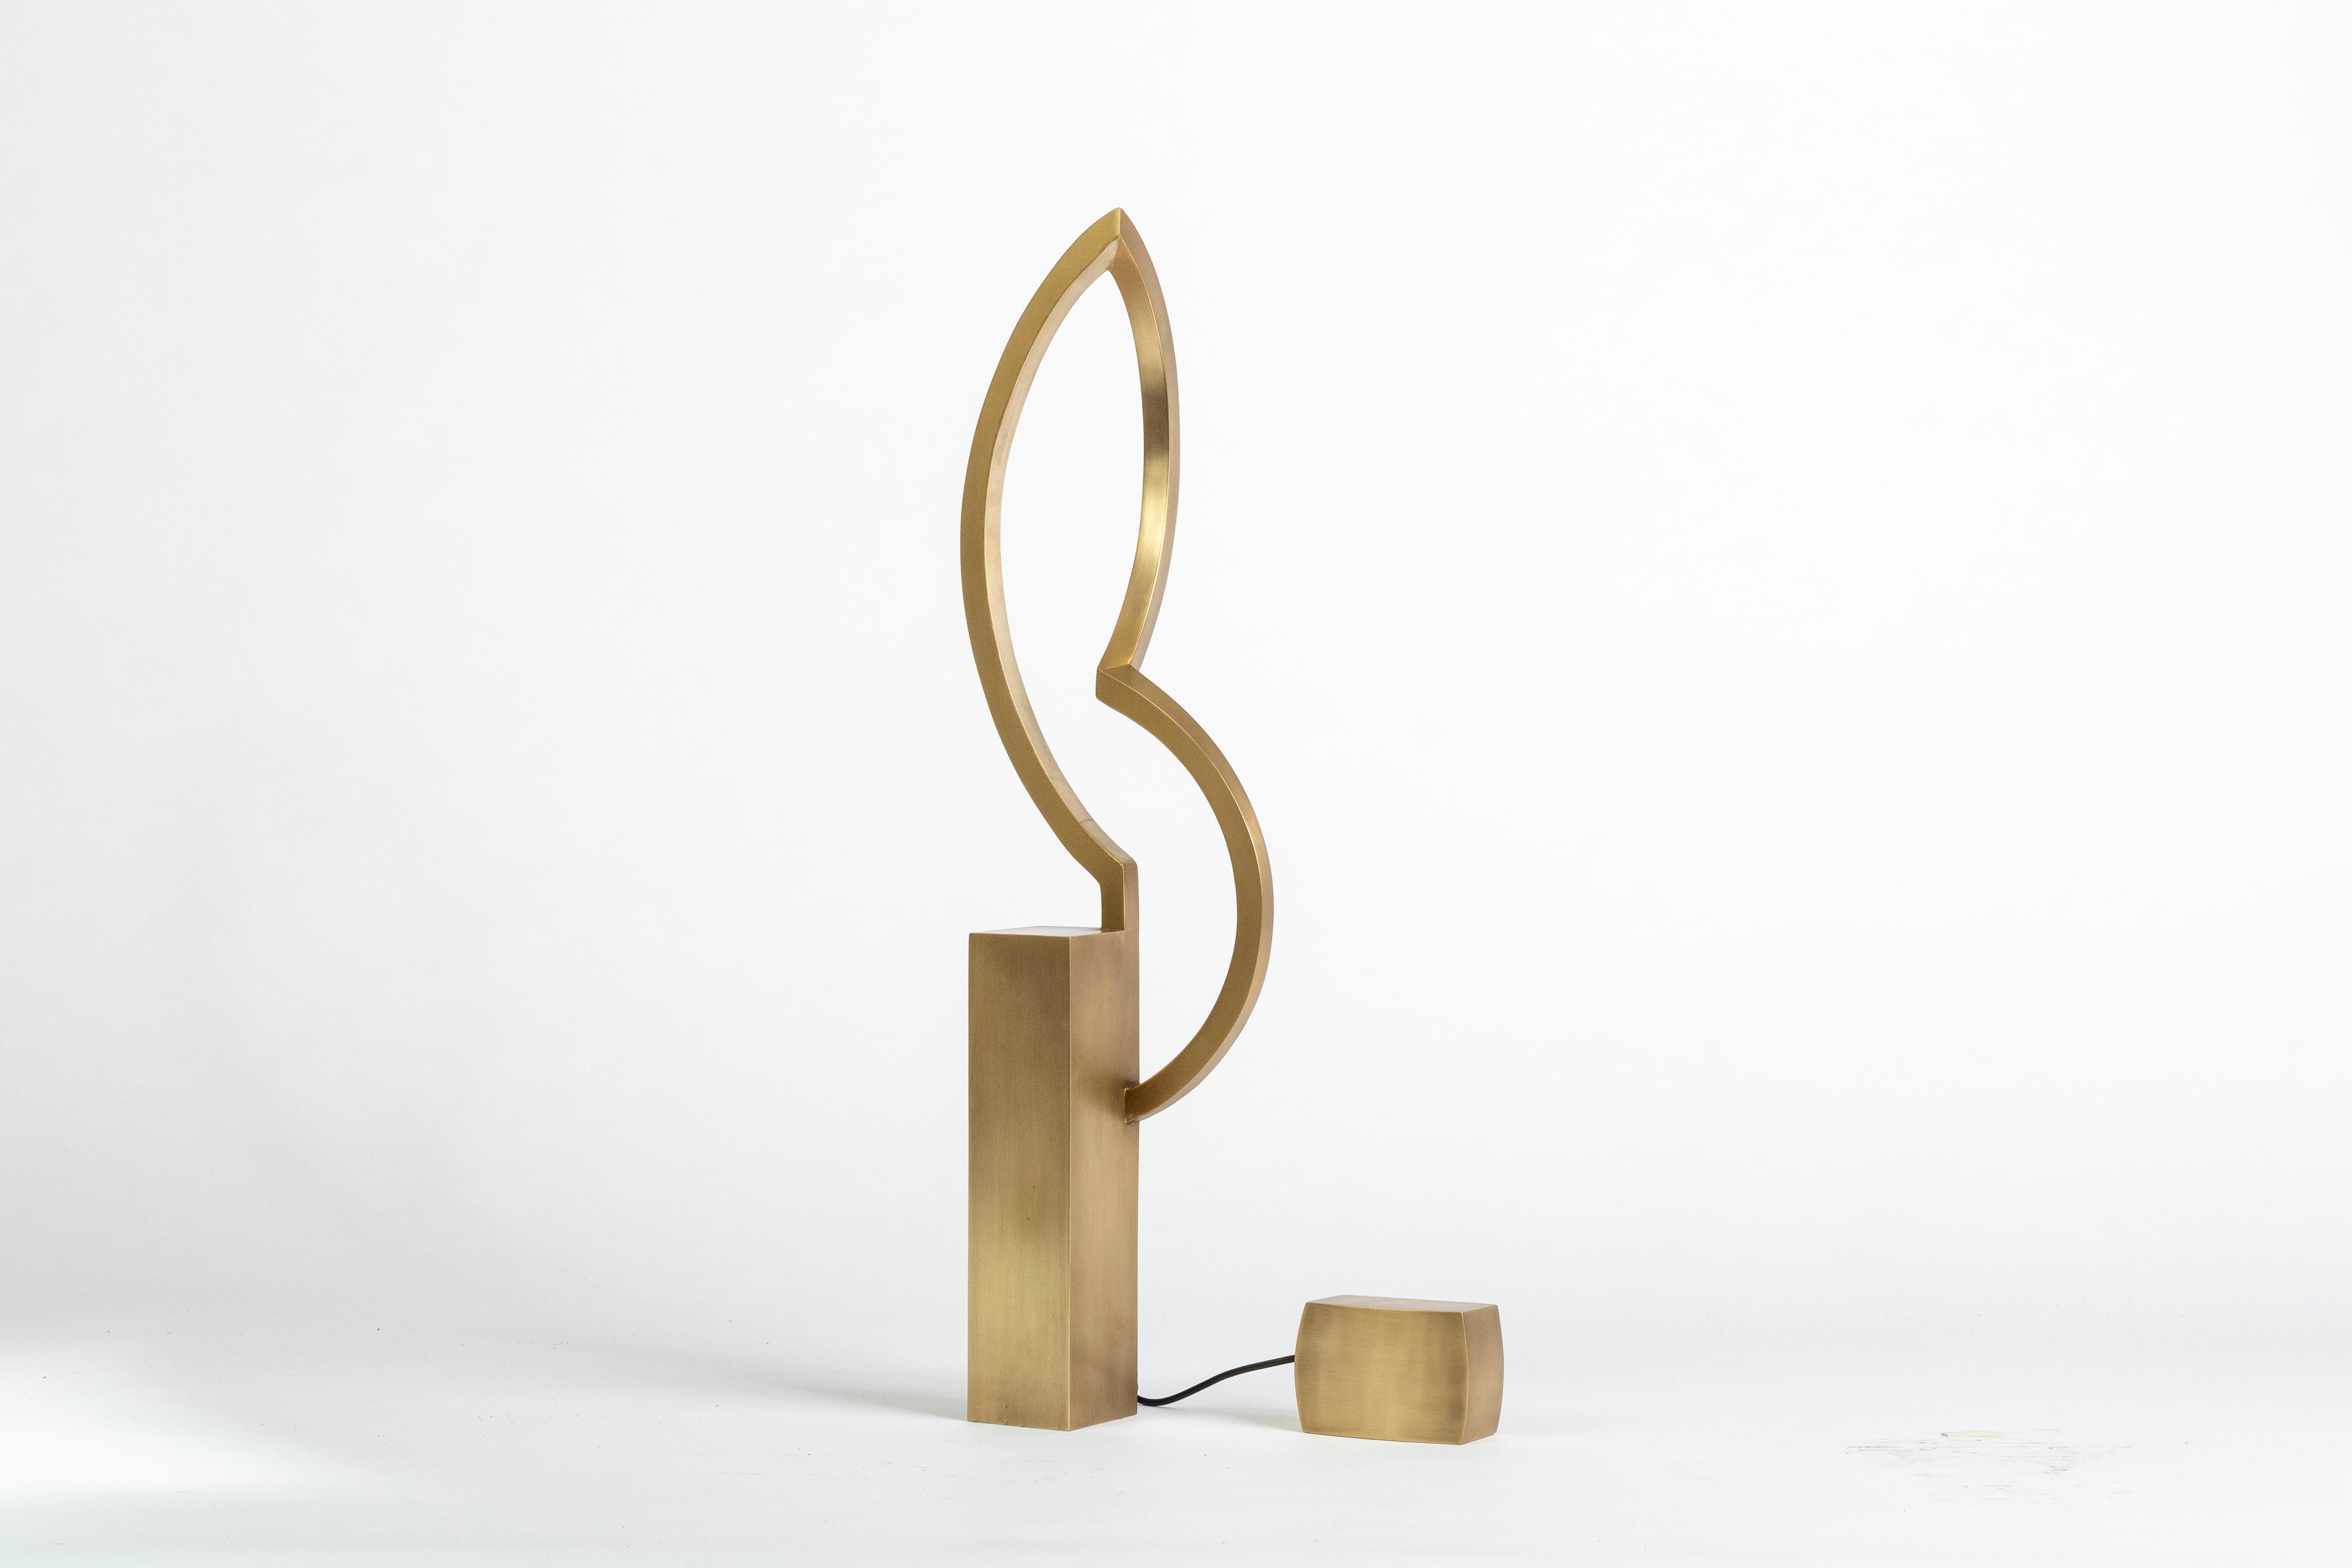 Patrick Coard Paris launches a unique and beautifully sculptural lighting collection inspired by music as a continuation of his candle line. The Dancer lamp small in bronze-patina brass is an ethereal table lamp with discreet LED lights and comes in